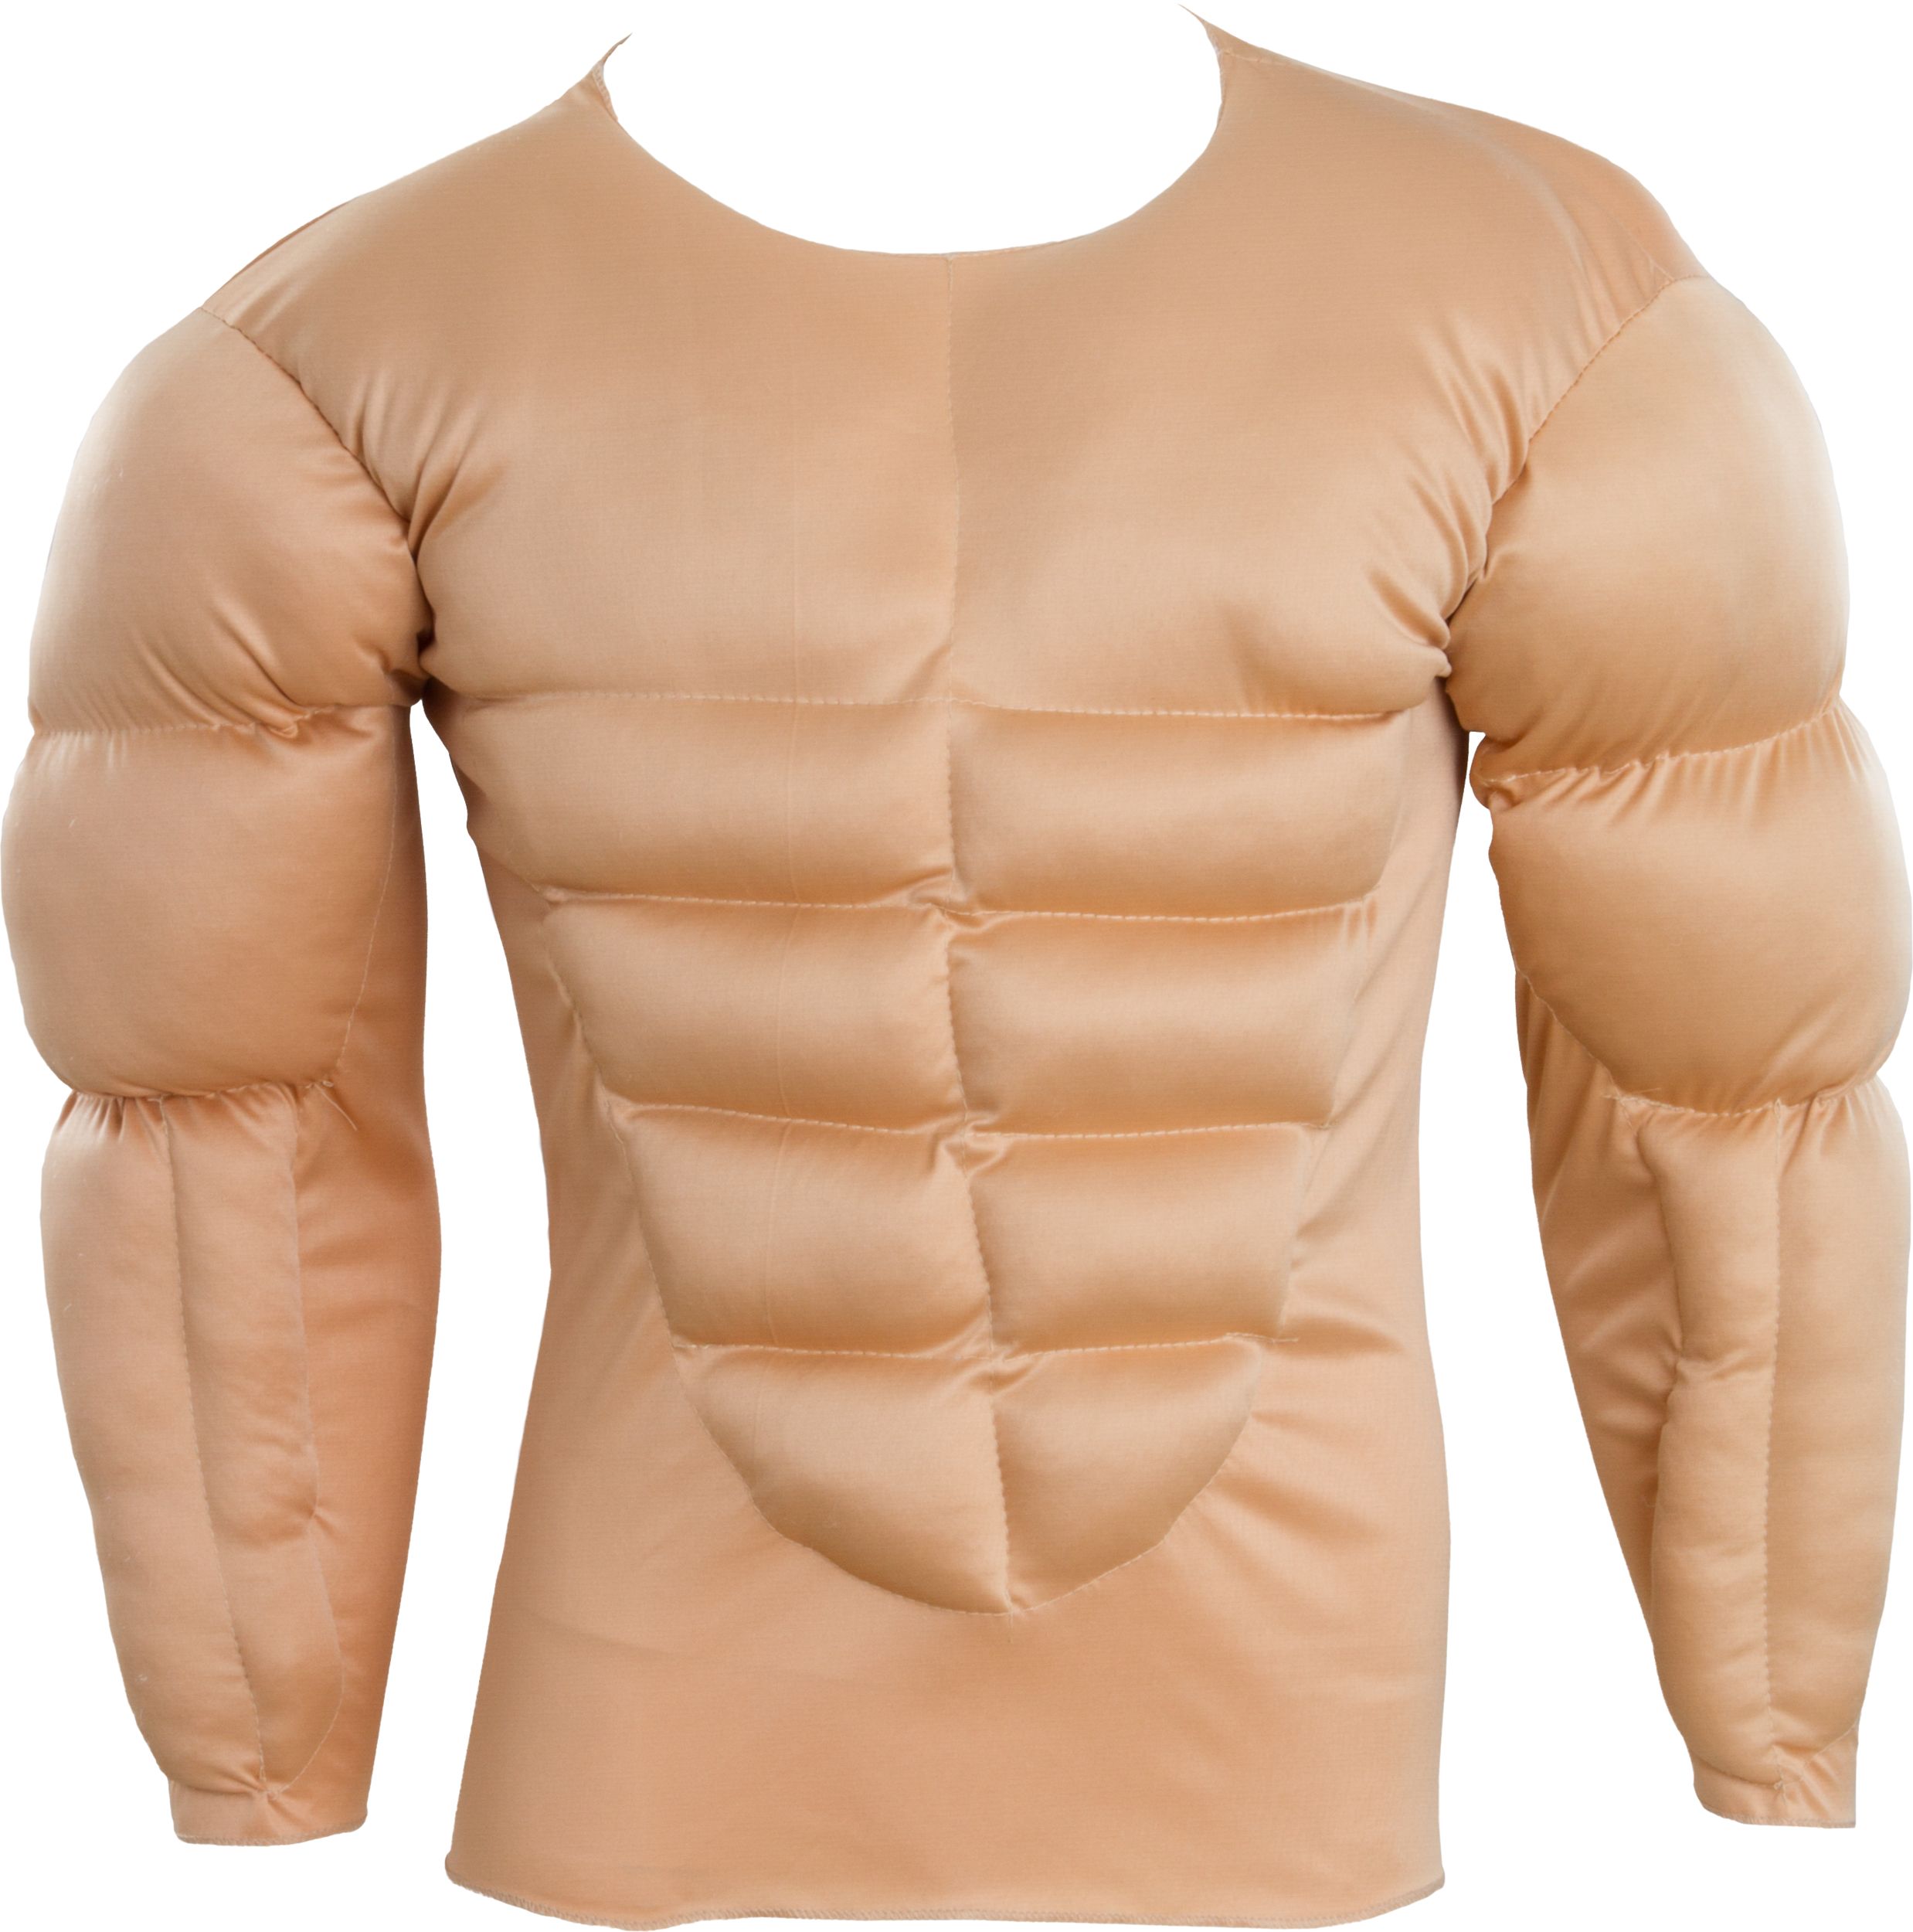 Adult Padded Muscle Long Sleeve Shirt, Beige, One Size, Wearable